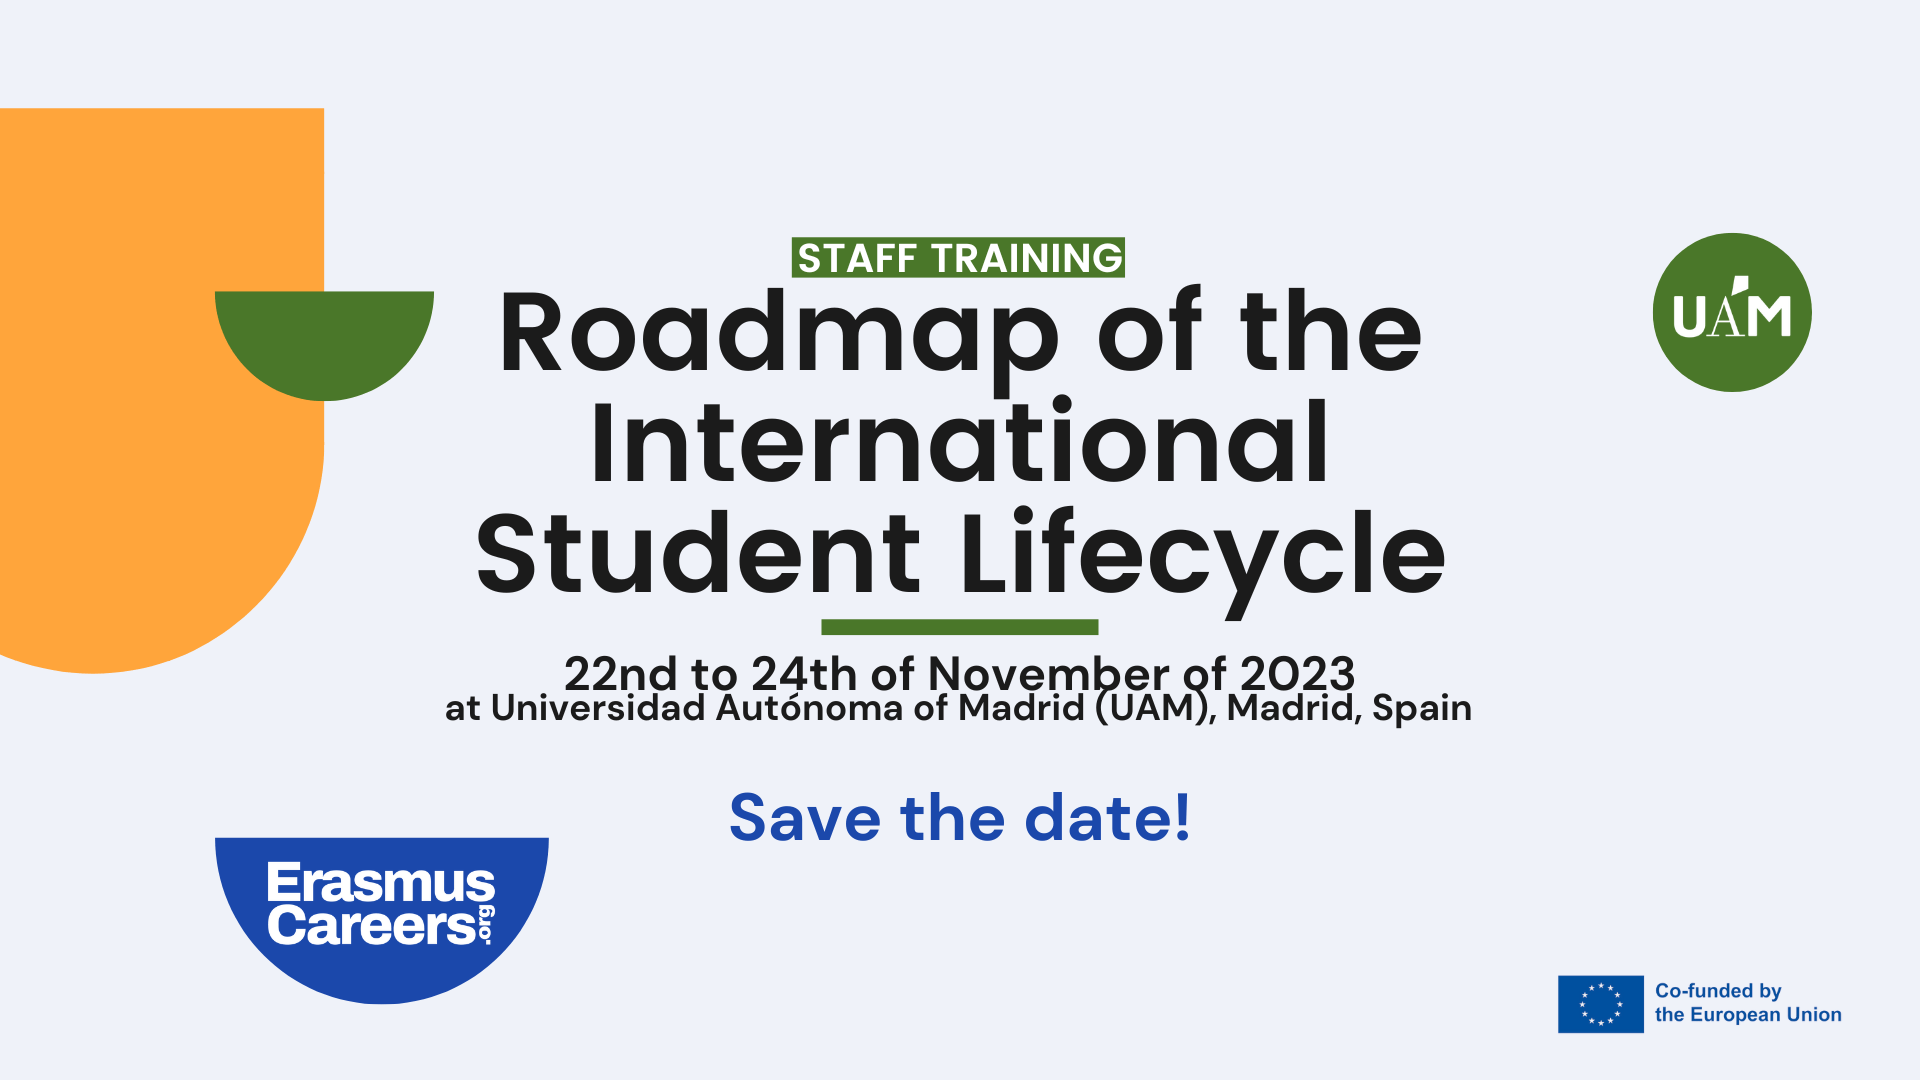 Join the training “Roadmap of the International Student Lifecycle”